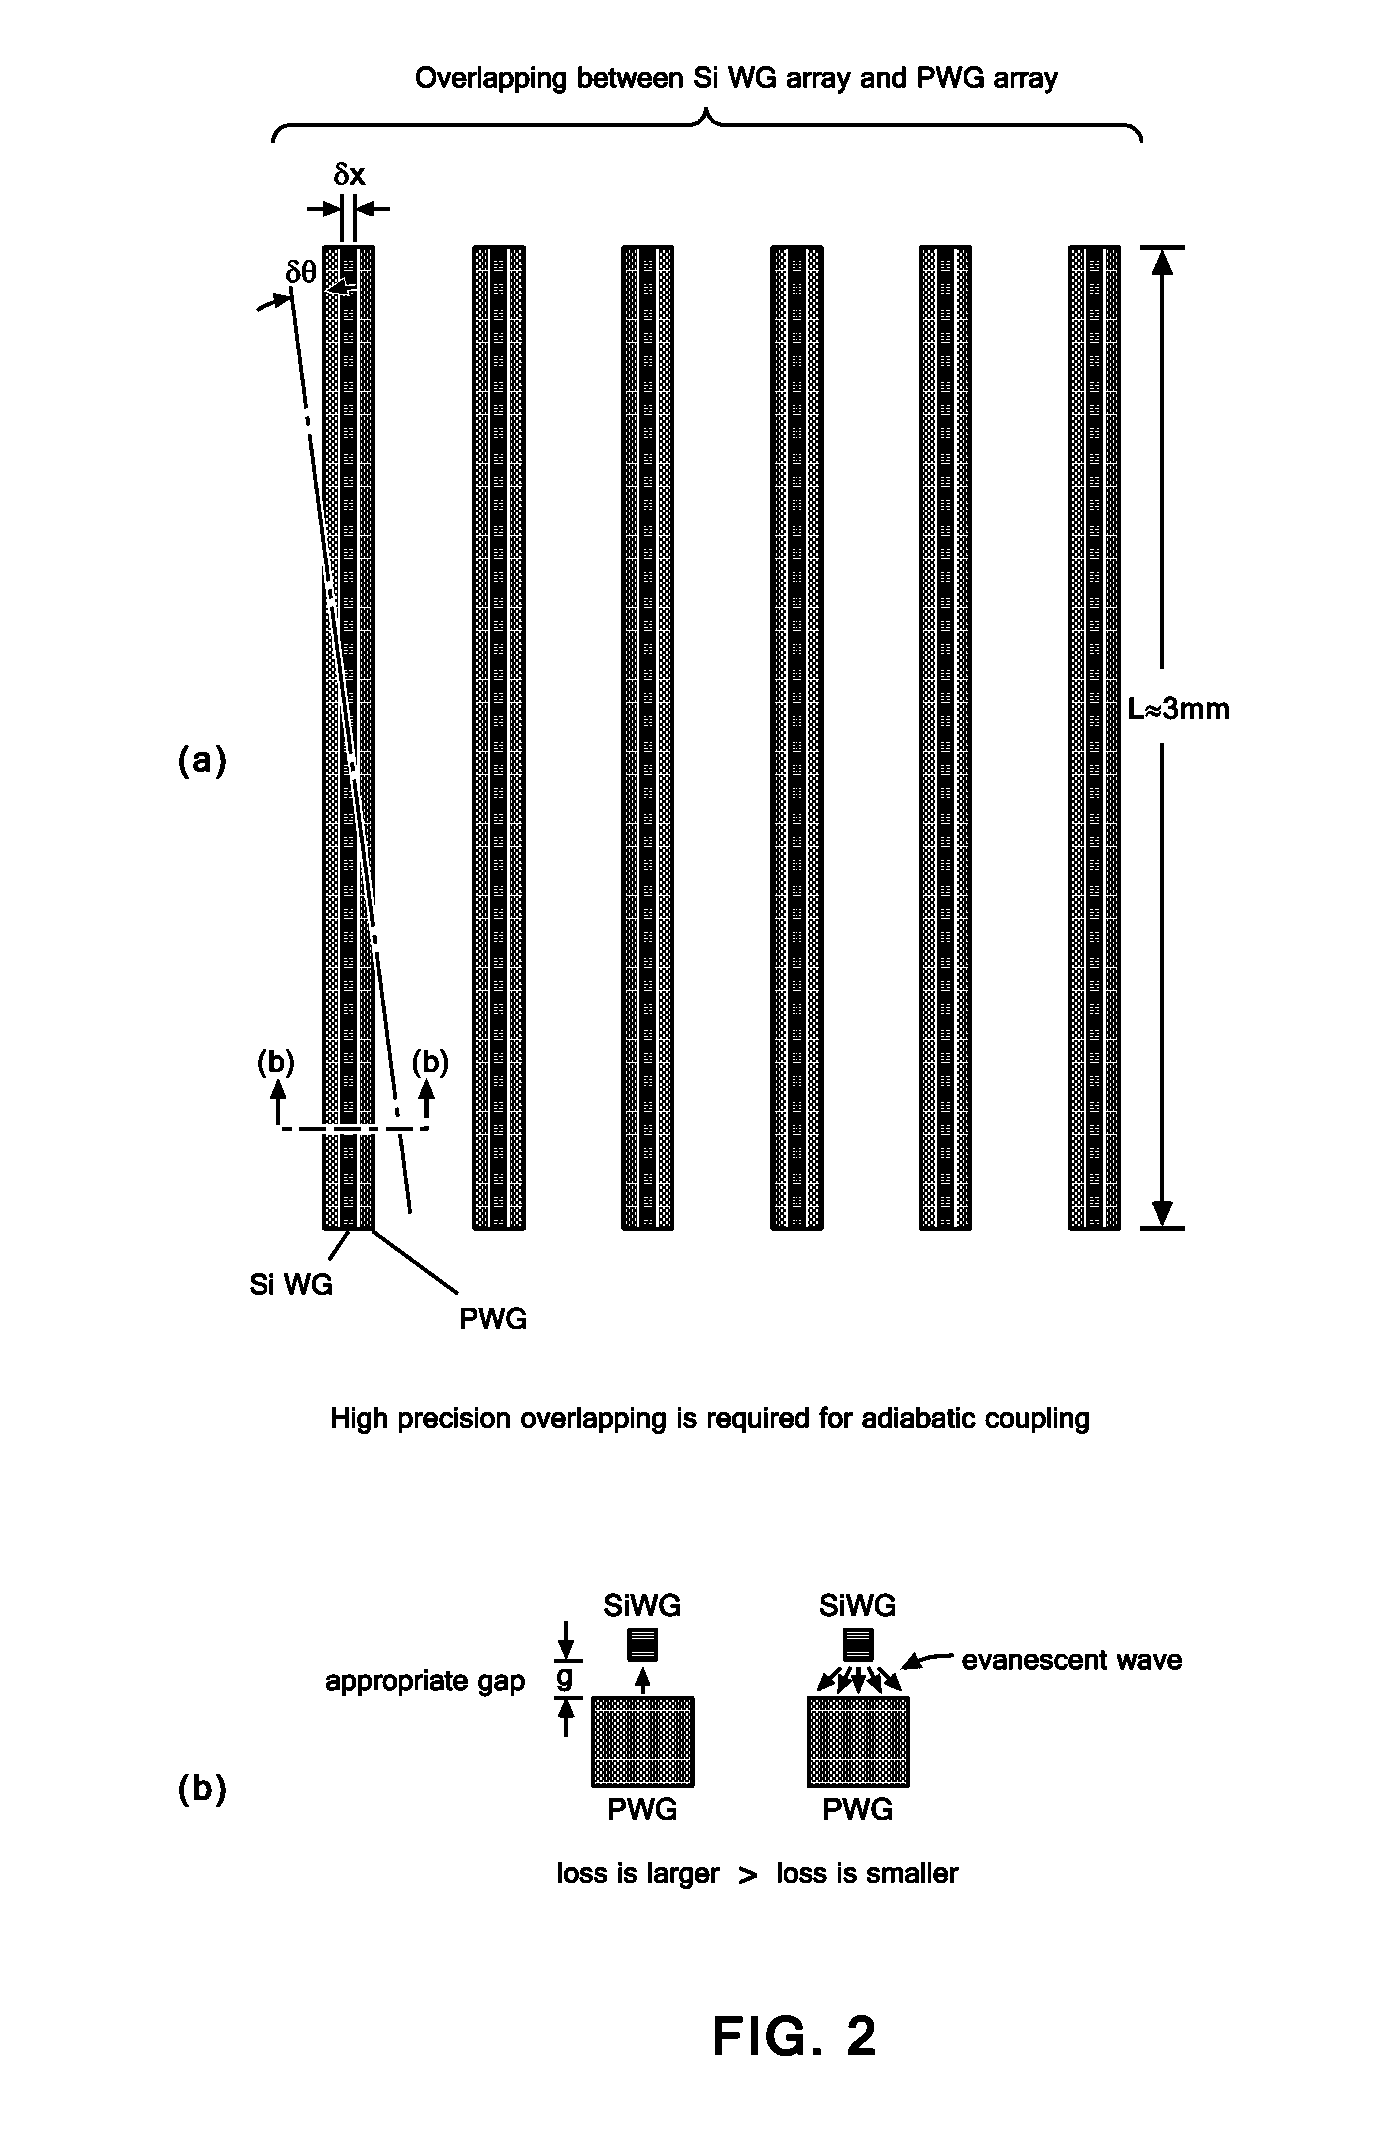 ALIGNMENT OF SINGLE-MODE POLYMER WAVEGUIDE (PWG) ARRAY AND SILICON WAVEGUIDE (SiWG) ARRAY FOR PROVIDING ADIABATIC COUPLING